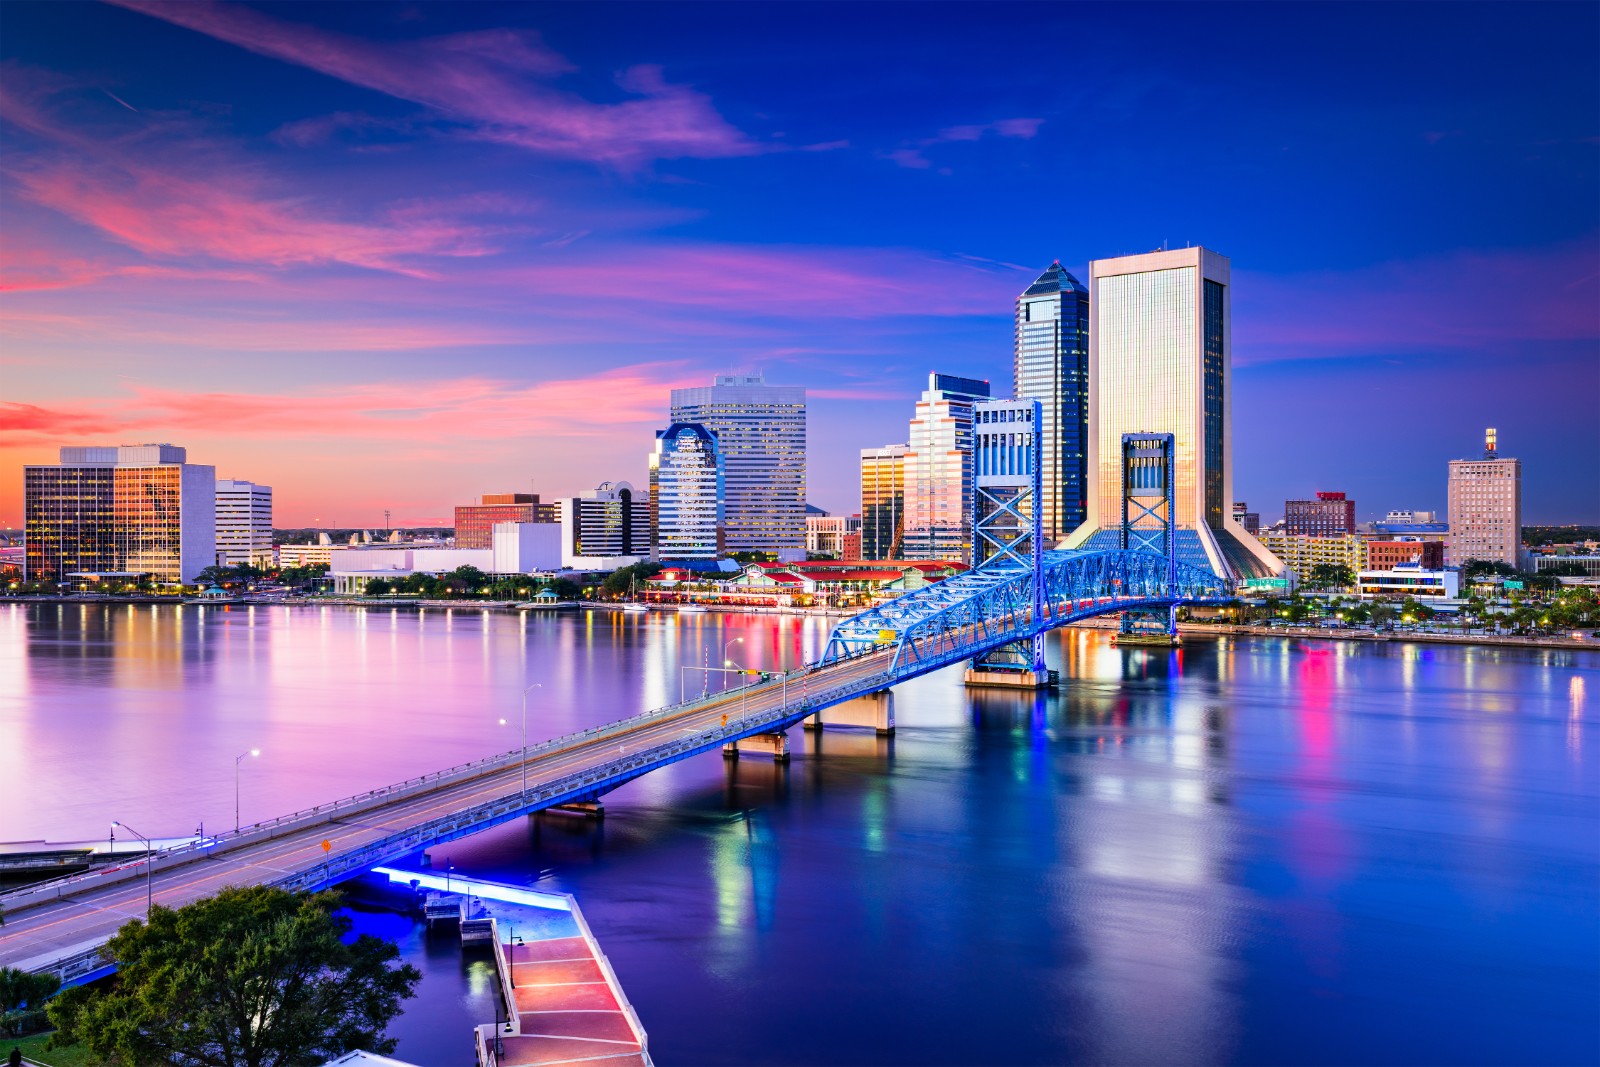 Downtown Jacksonville, Florida skyline at sunset with bridge over river in foreground.